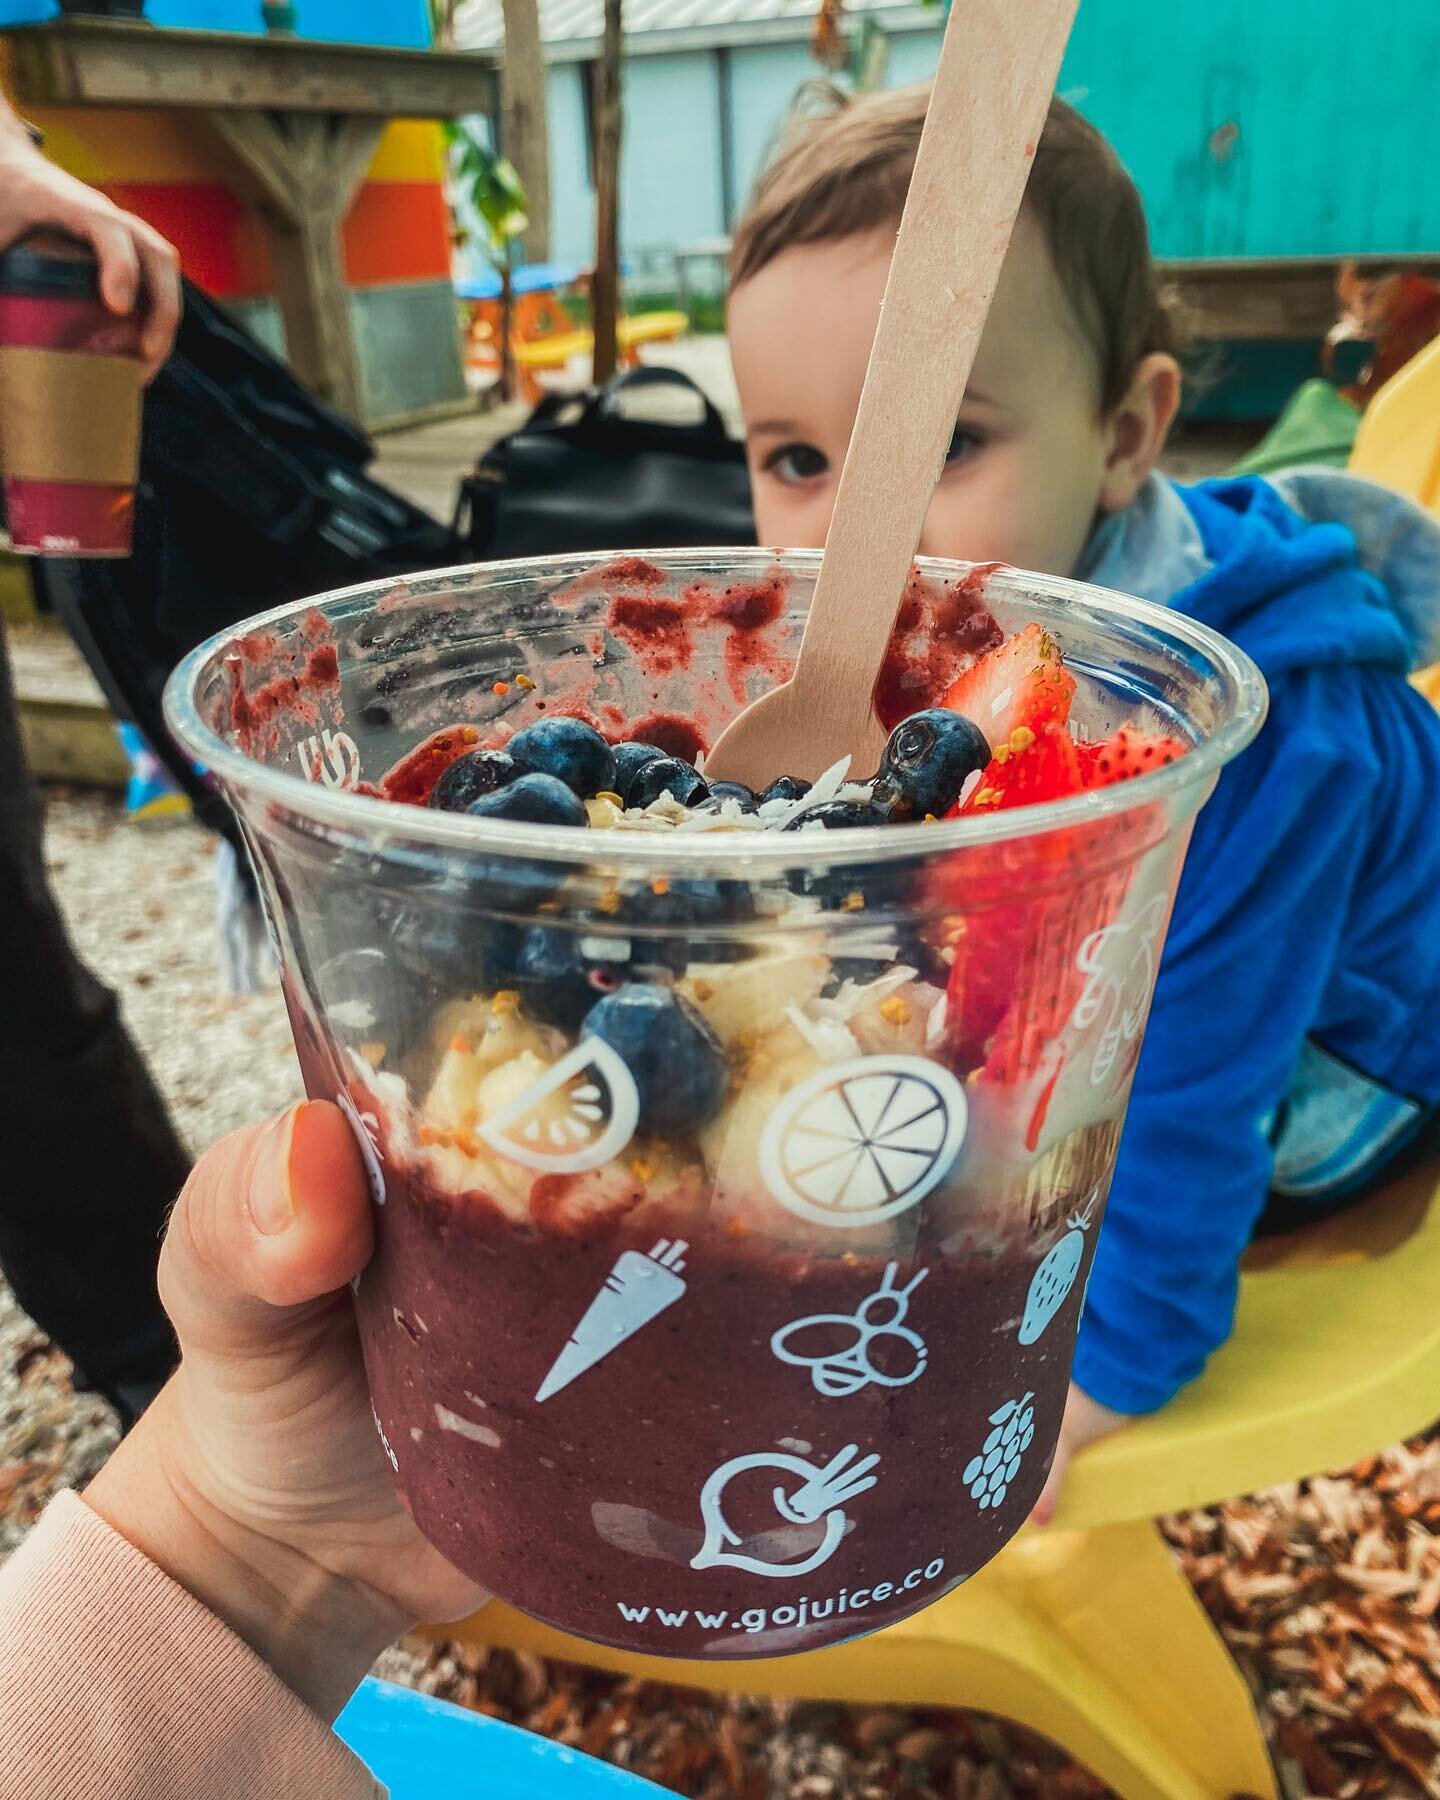 Nothing does this prego lady&rsquo;s heart better than an a&ccedil;a&iacute; bowl. It&rsquo;s the closest thing to a frozen cocktail on the beach (ok maybe a smoothie would be closer, but close enough!). I&rsquo;ve been getting a lot of noms from @go